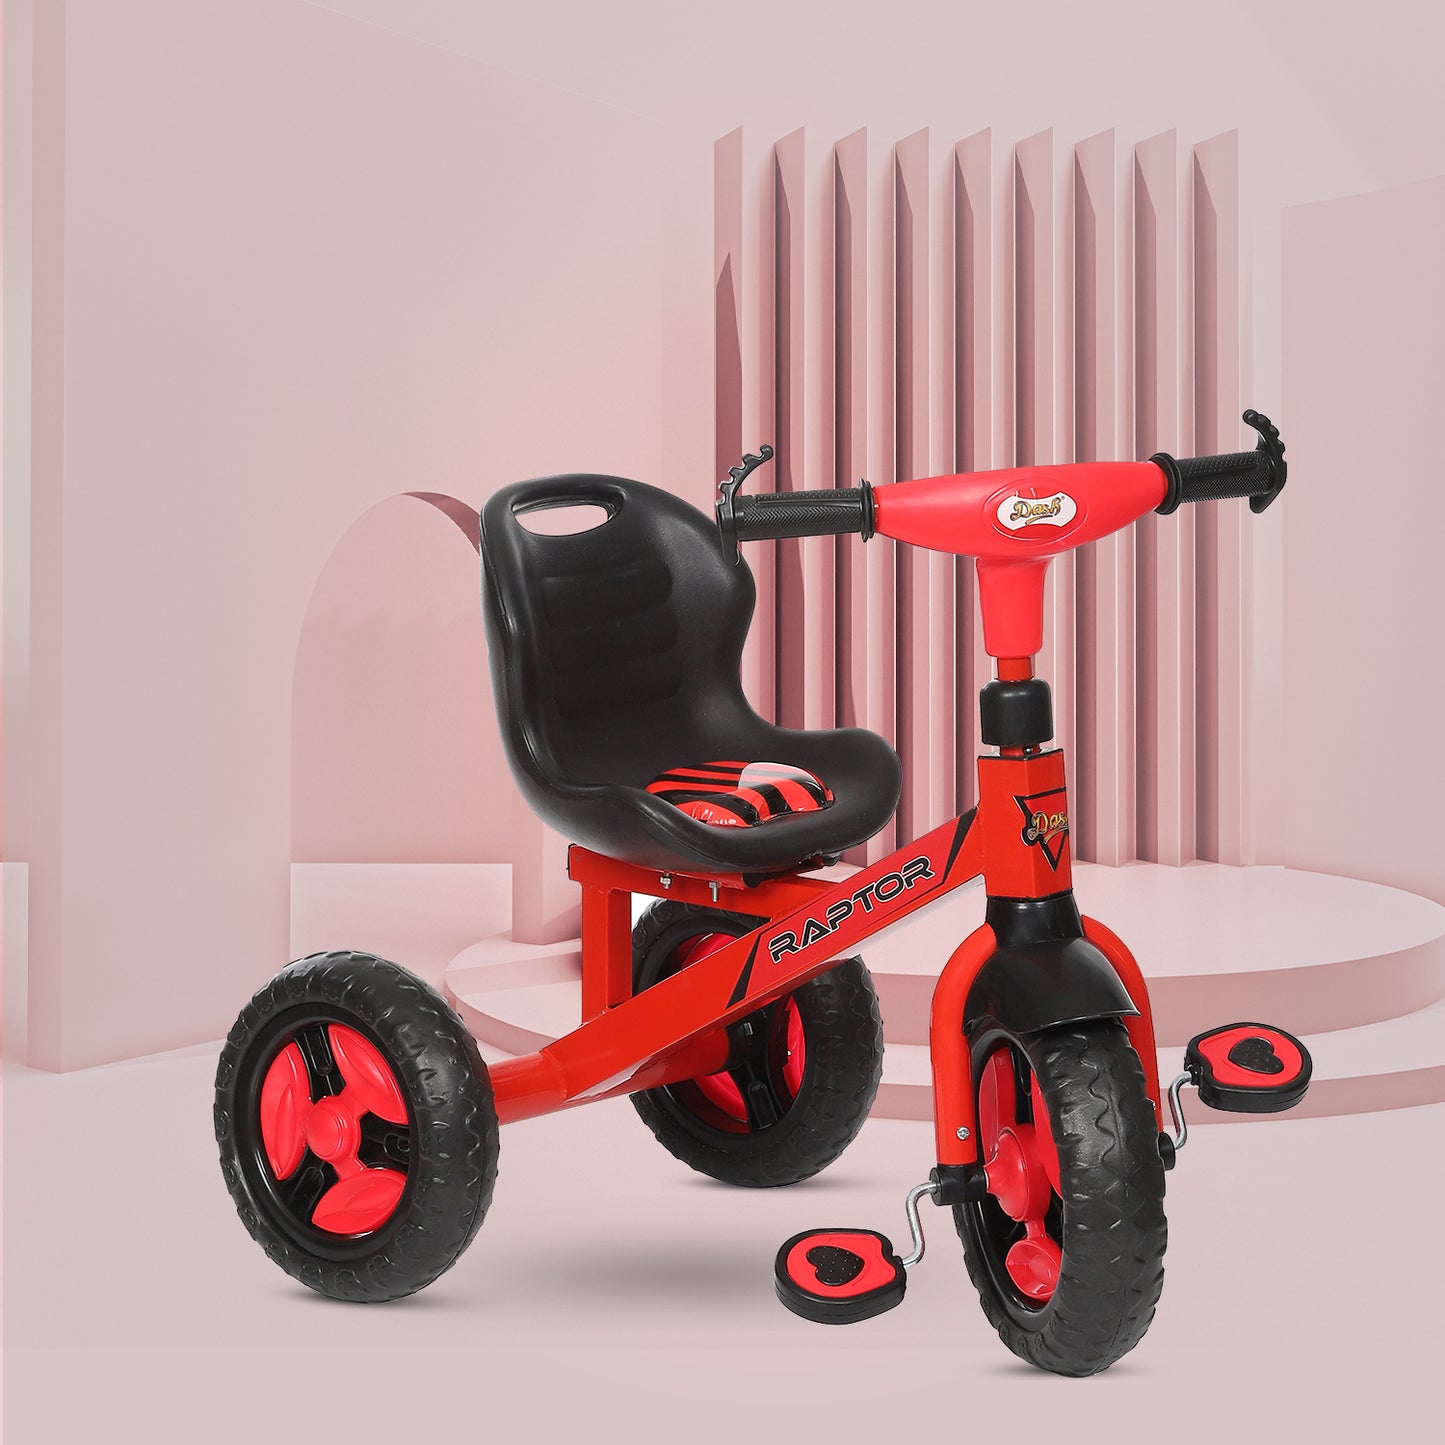 Dash Raptor Tricycle for Kids (Capacity 25Kg, Choose any color)